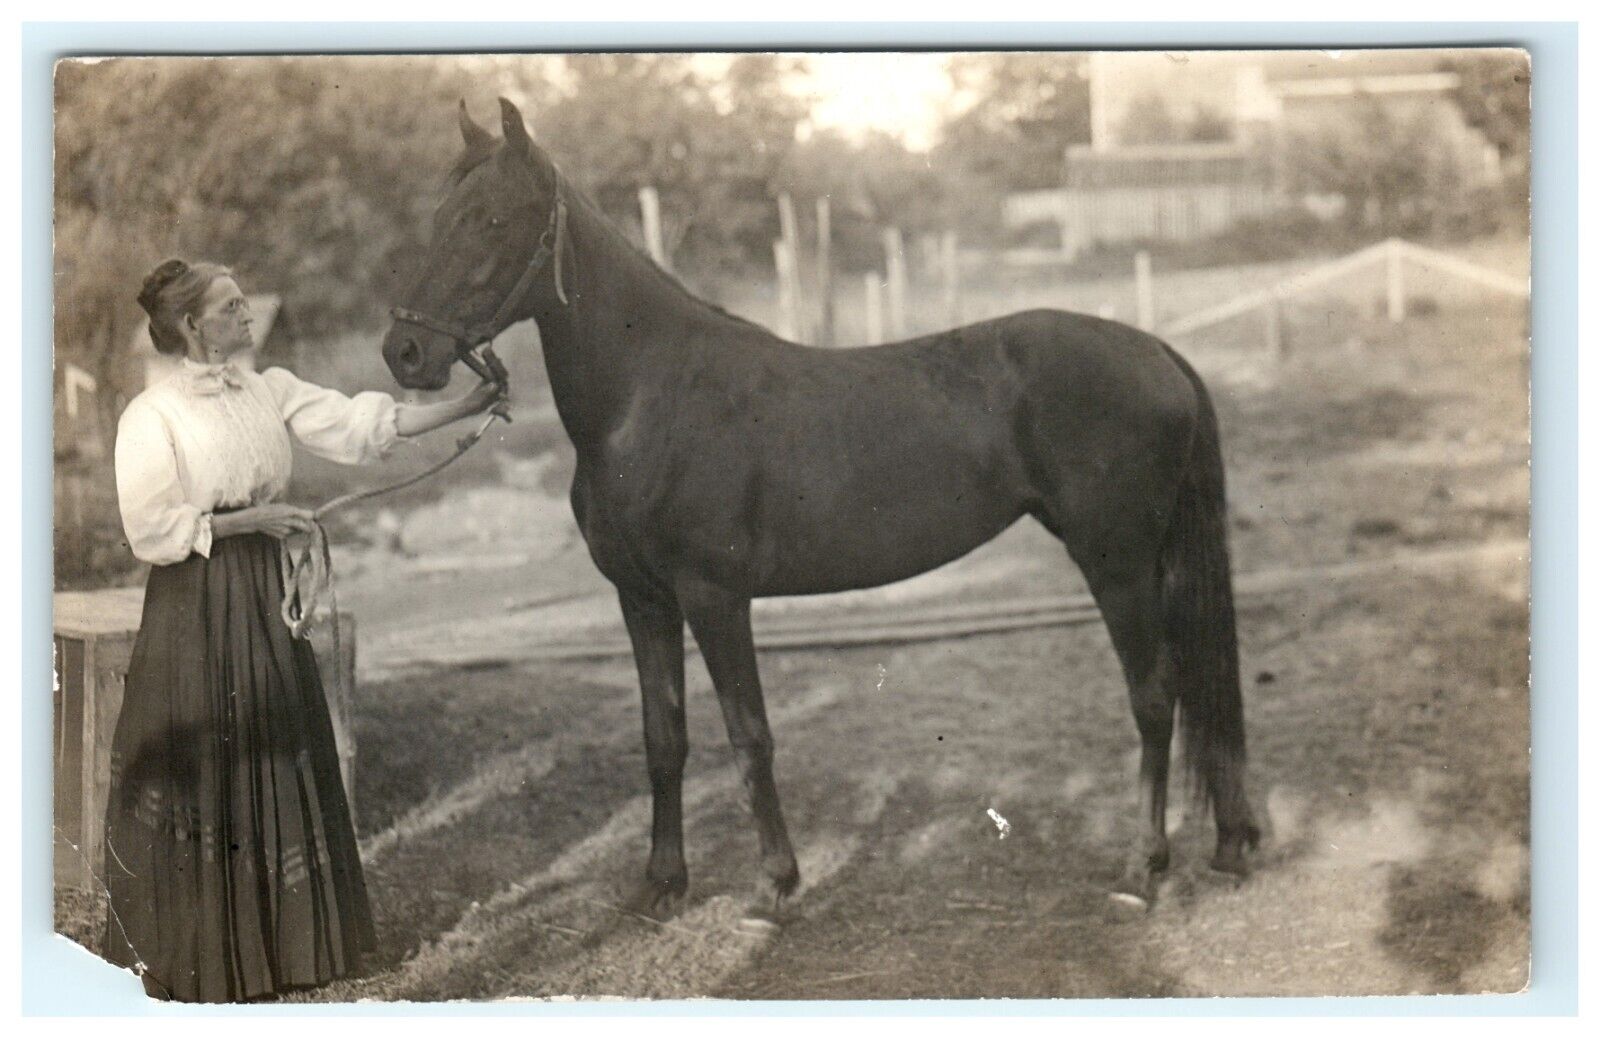 Woman Holding Horse Stratford NY New York Early Postcard RPPC F.O. Dodge - Torn